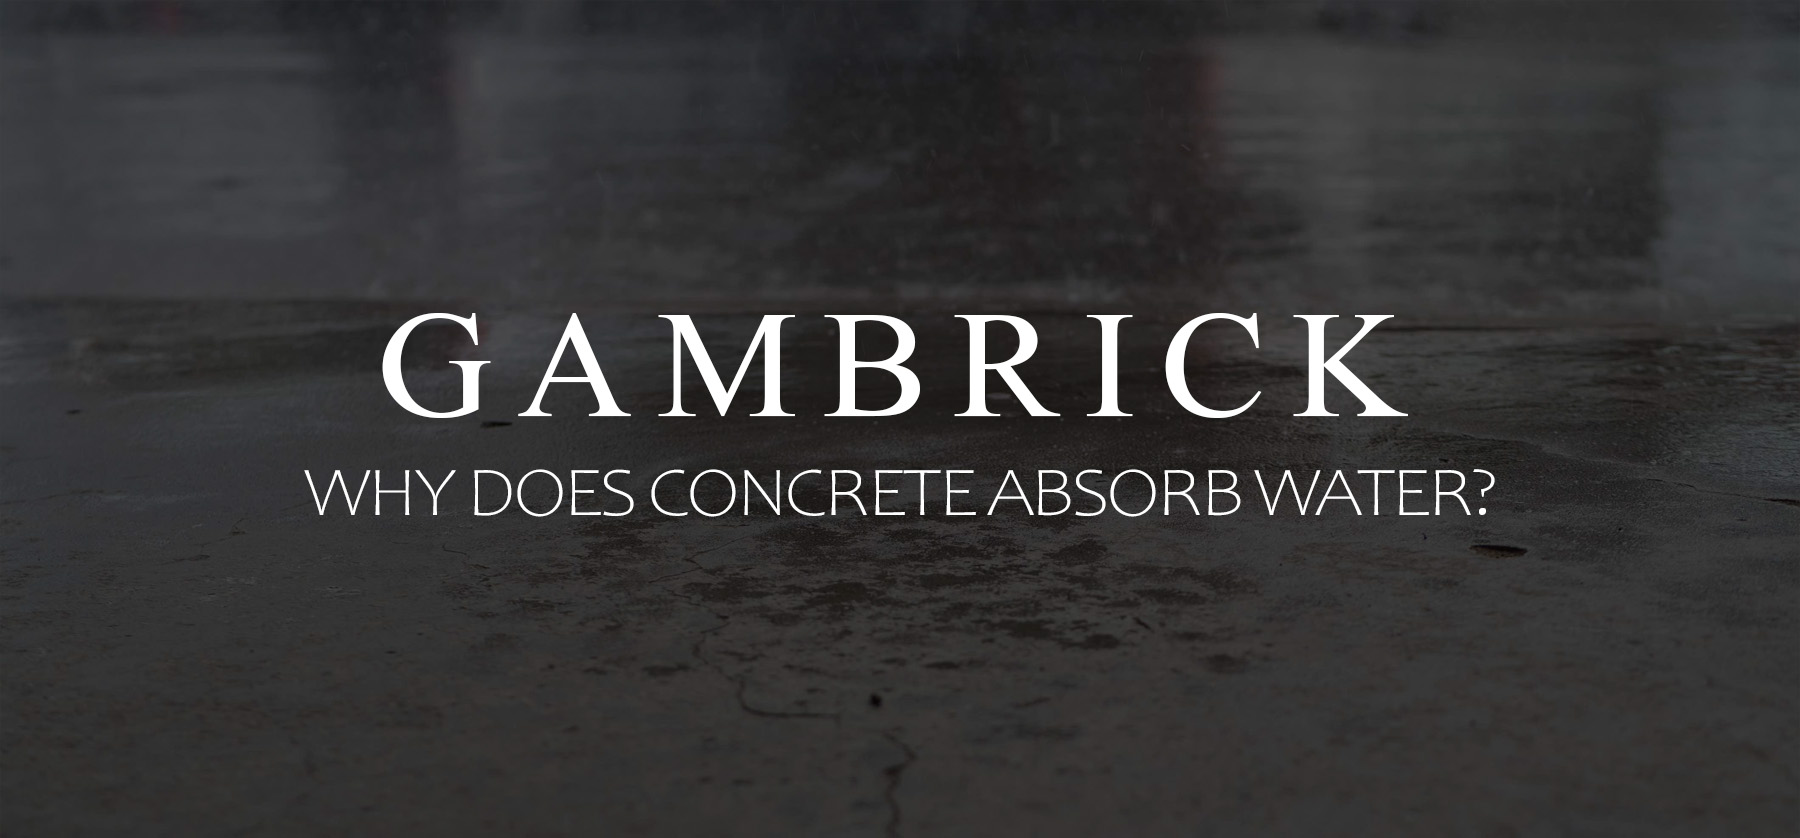 why does concrete absorb water banner pic